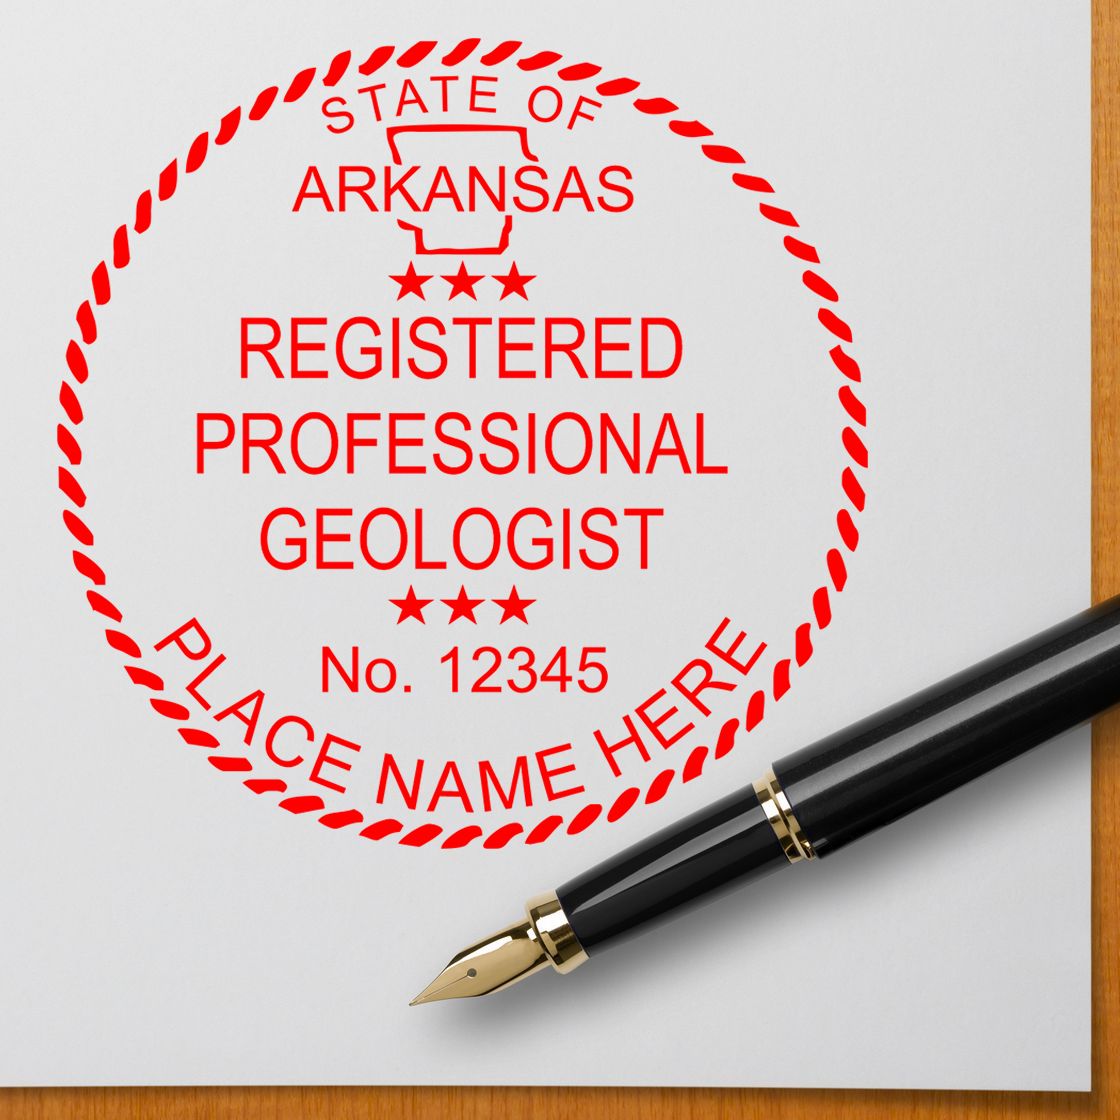 The Digital Arkansas Geologist Stamp, Electronic Seal for Arkansas Geologist stamp impression comes to life with a crisp, detailed image stamped on paper - showcasing true professional quality.